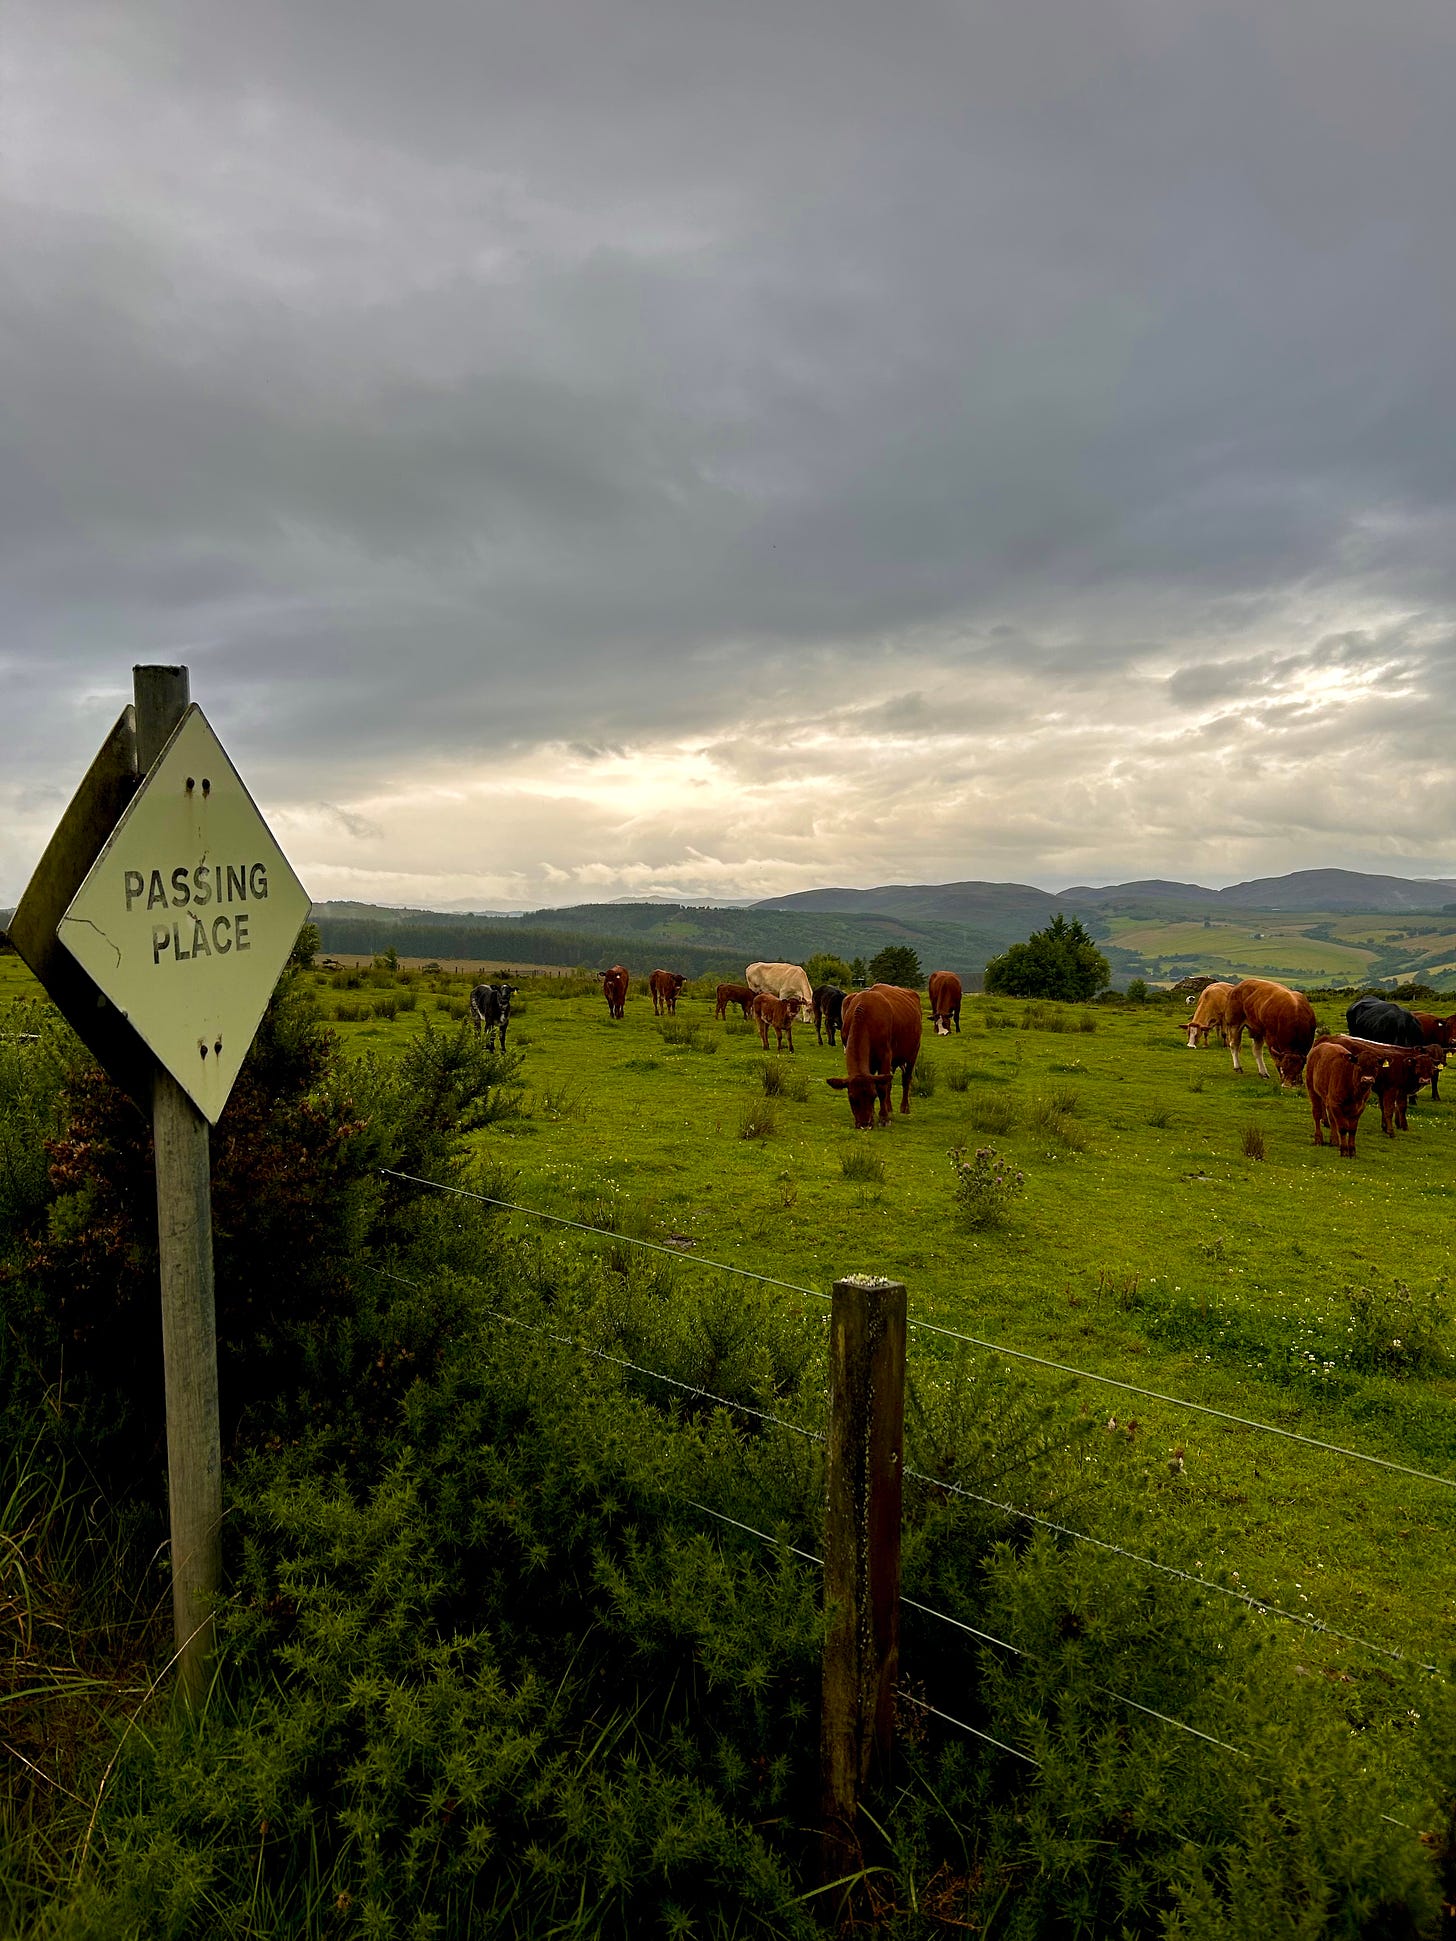 A landscape photo. In the foreground is a road sign that says "passing place" and a wire fence with wooden posts. Behind the fence is a pasture filled with cows that are brown and black and white. In the distance are hills and farmlands. The sky is overcast but light comes through near the horizon.